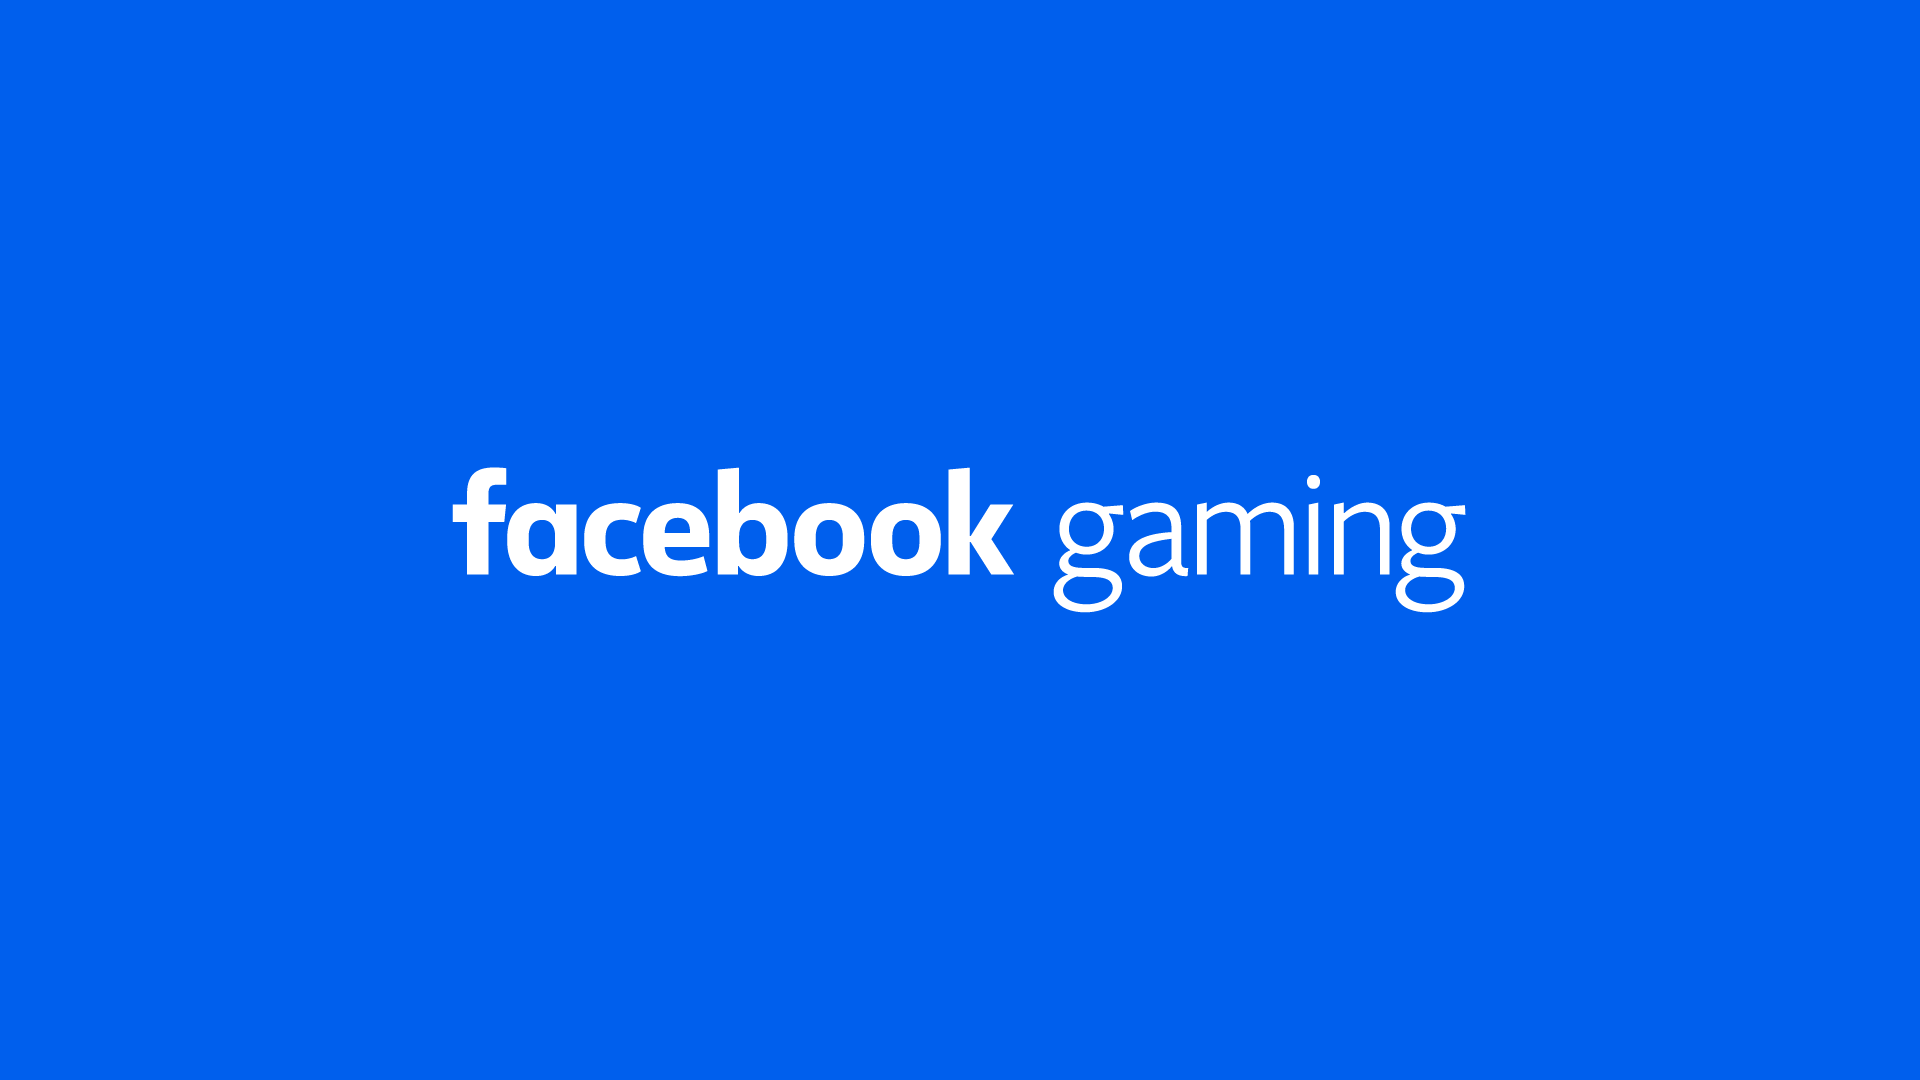 Facebook Gaming Launches App to Compete with YouTube